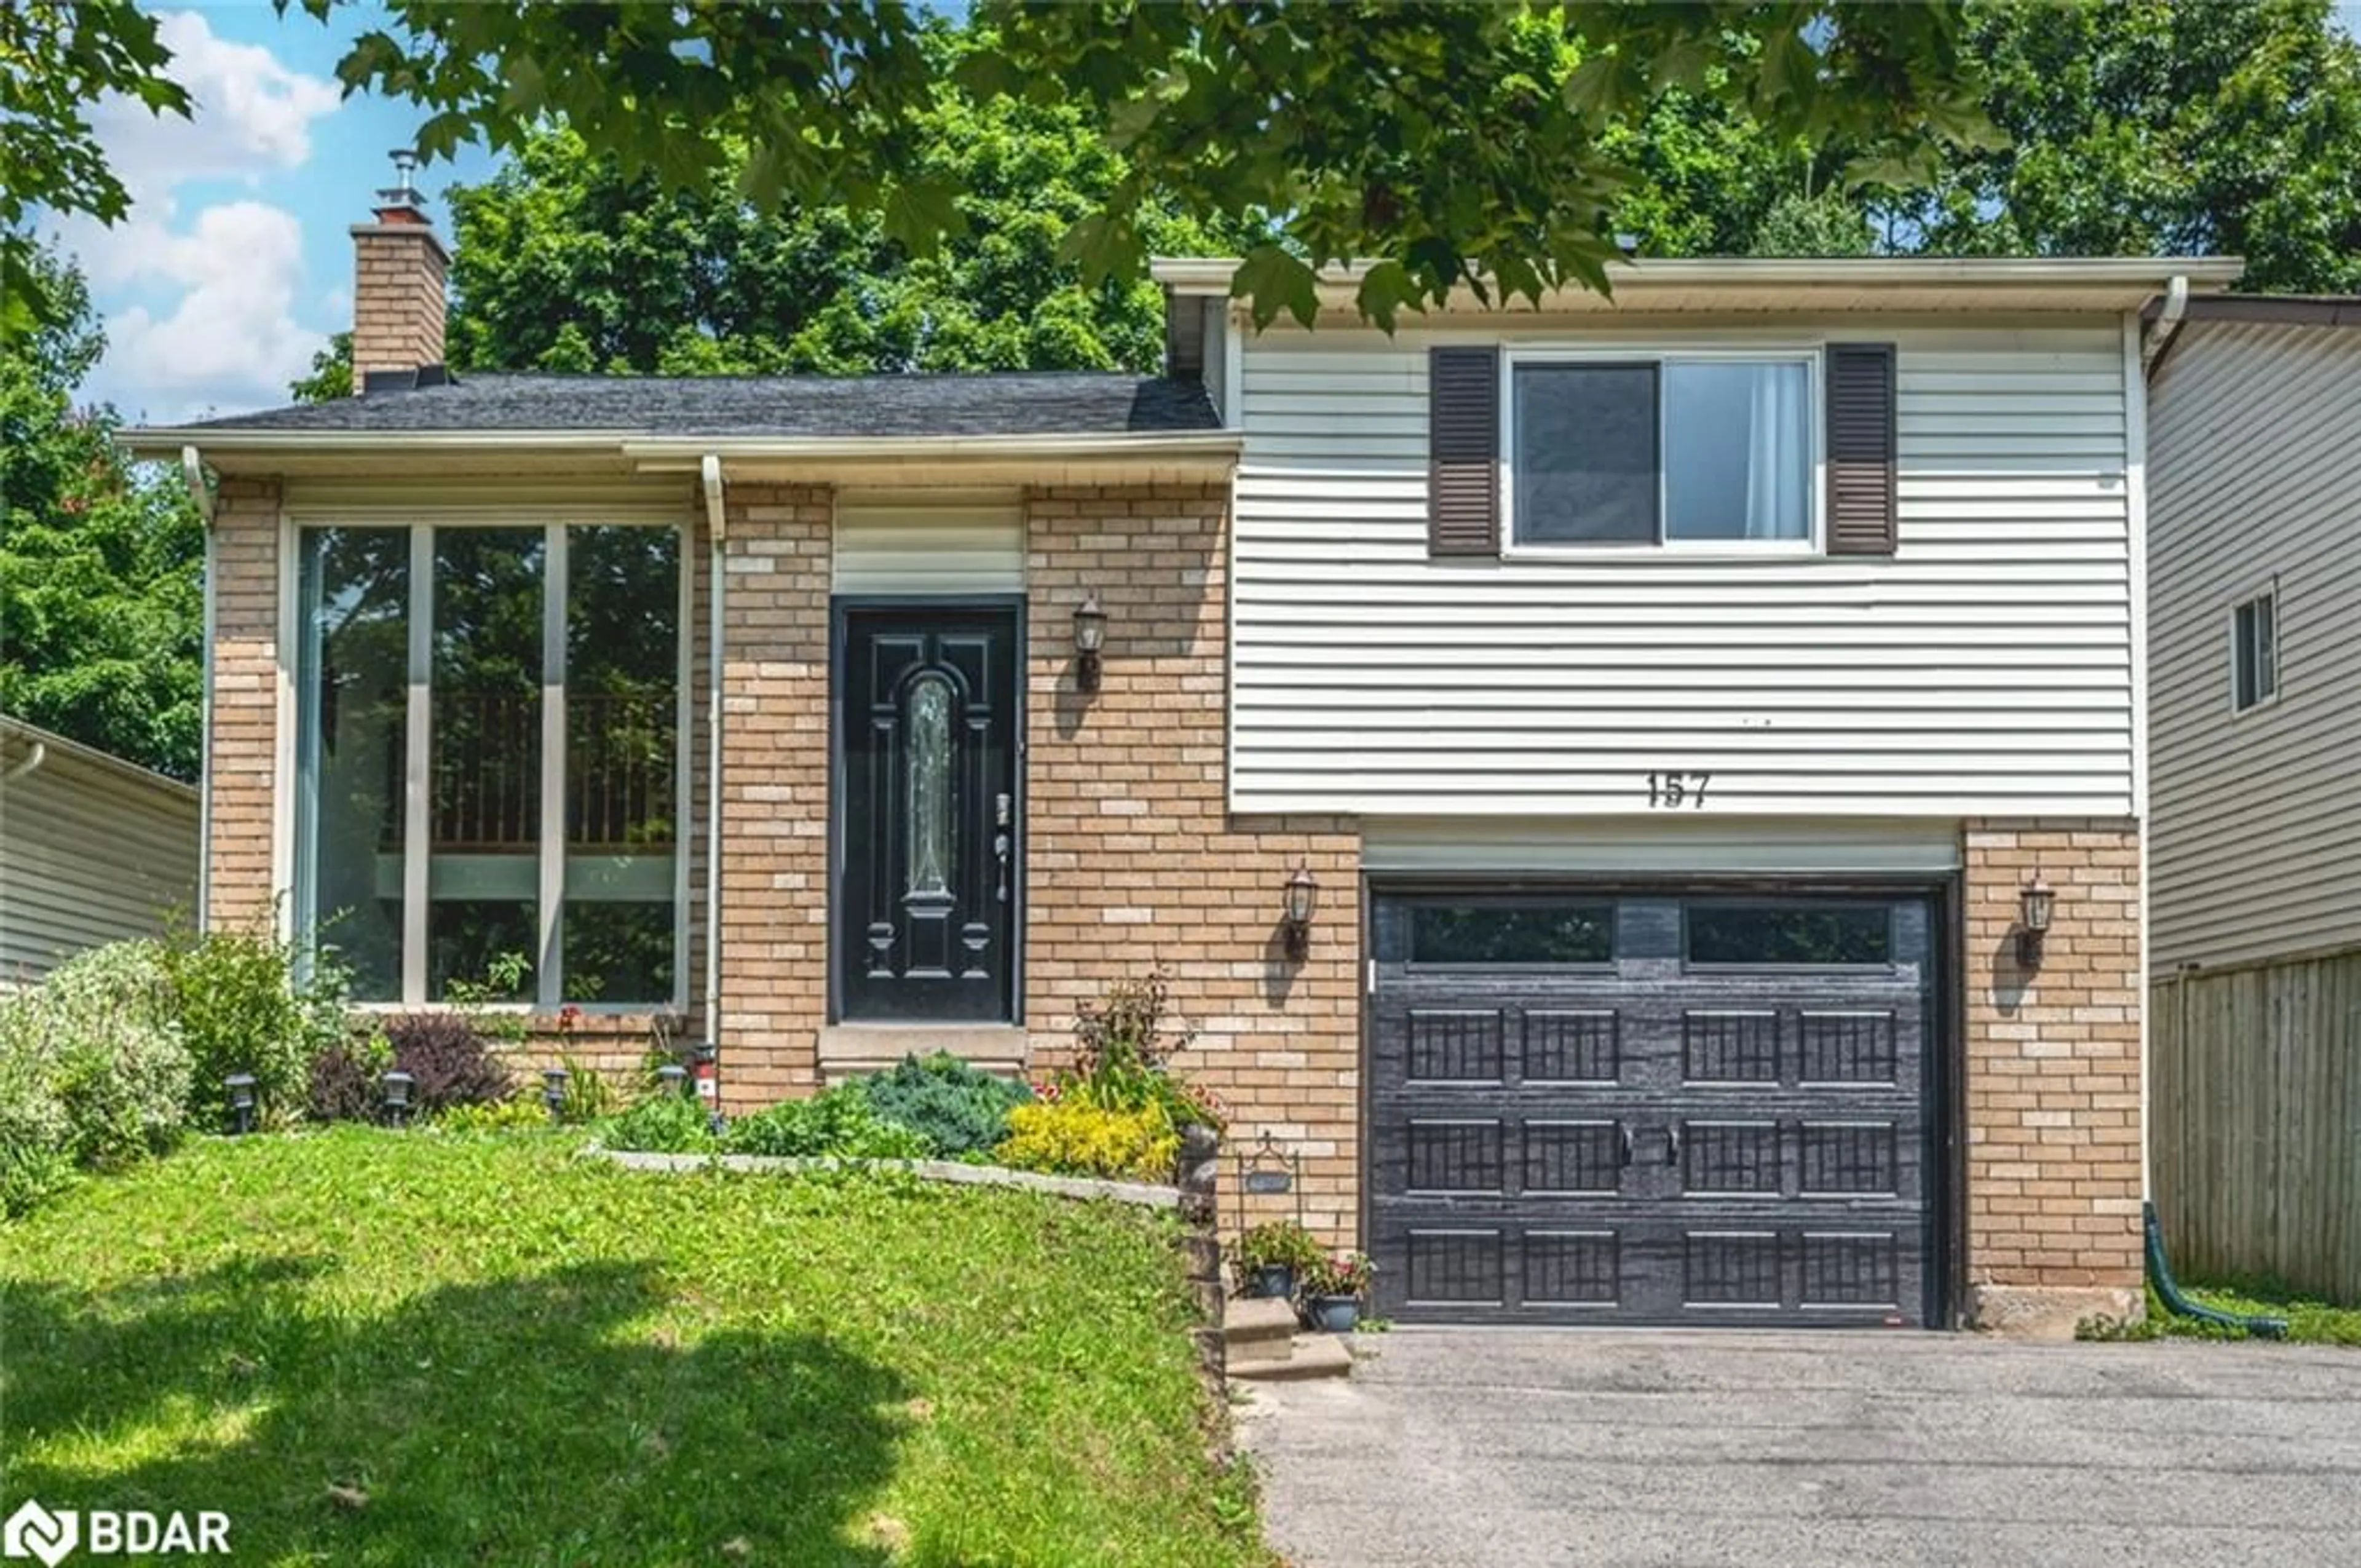 Home with brick exterior material for 157 Hickling Trail, Barrie Ontario L4M 5T6